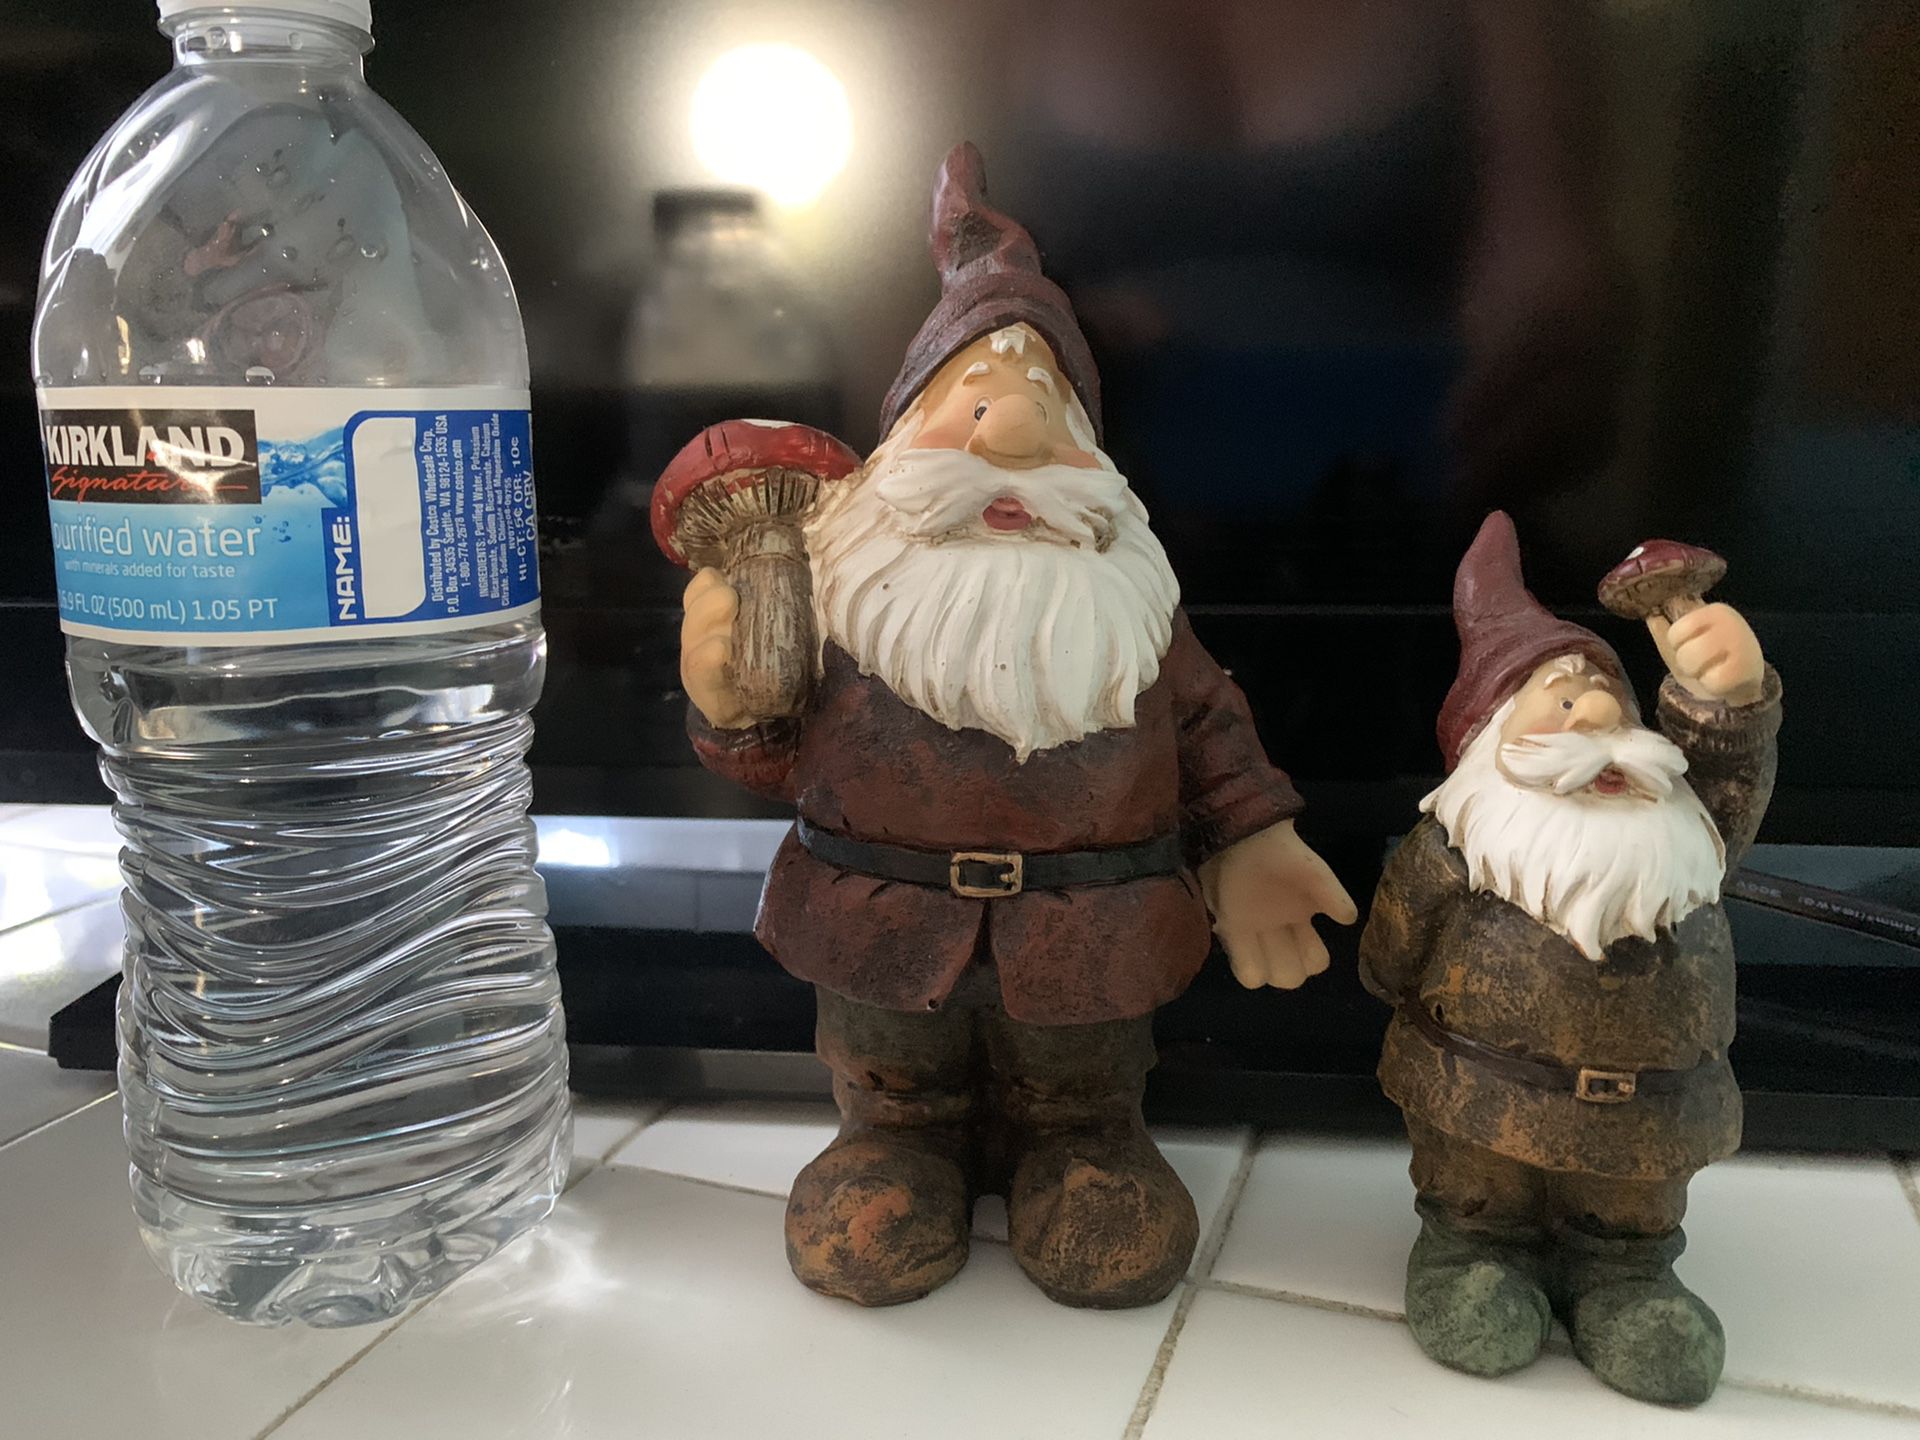 Cutest knomes ever🥰